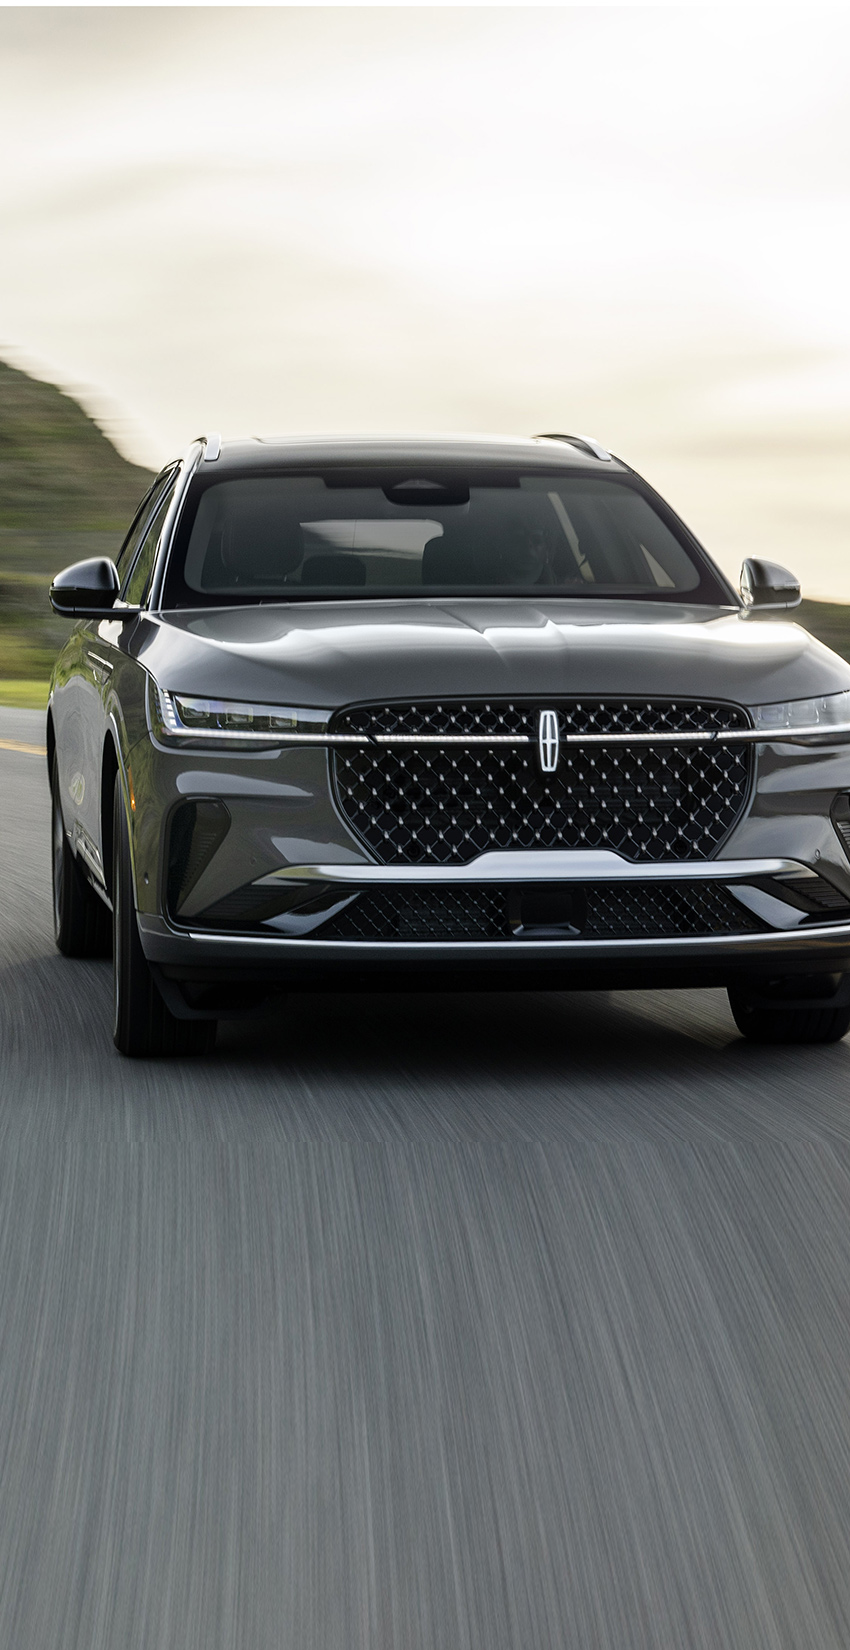 All-New Lincoln Nautilus